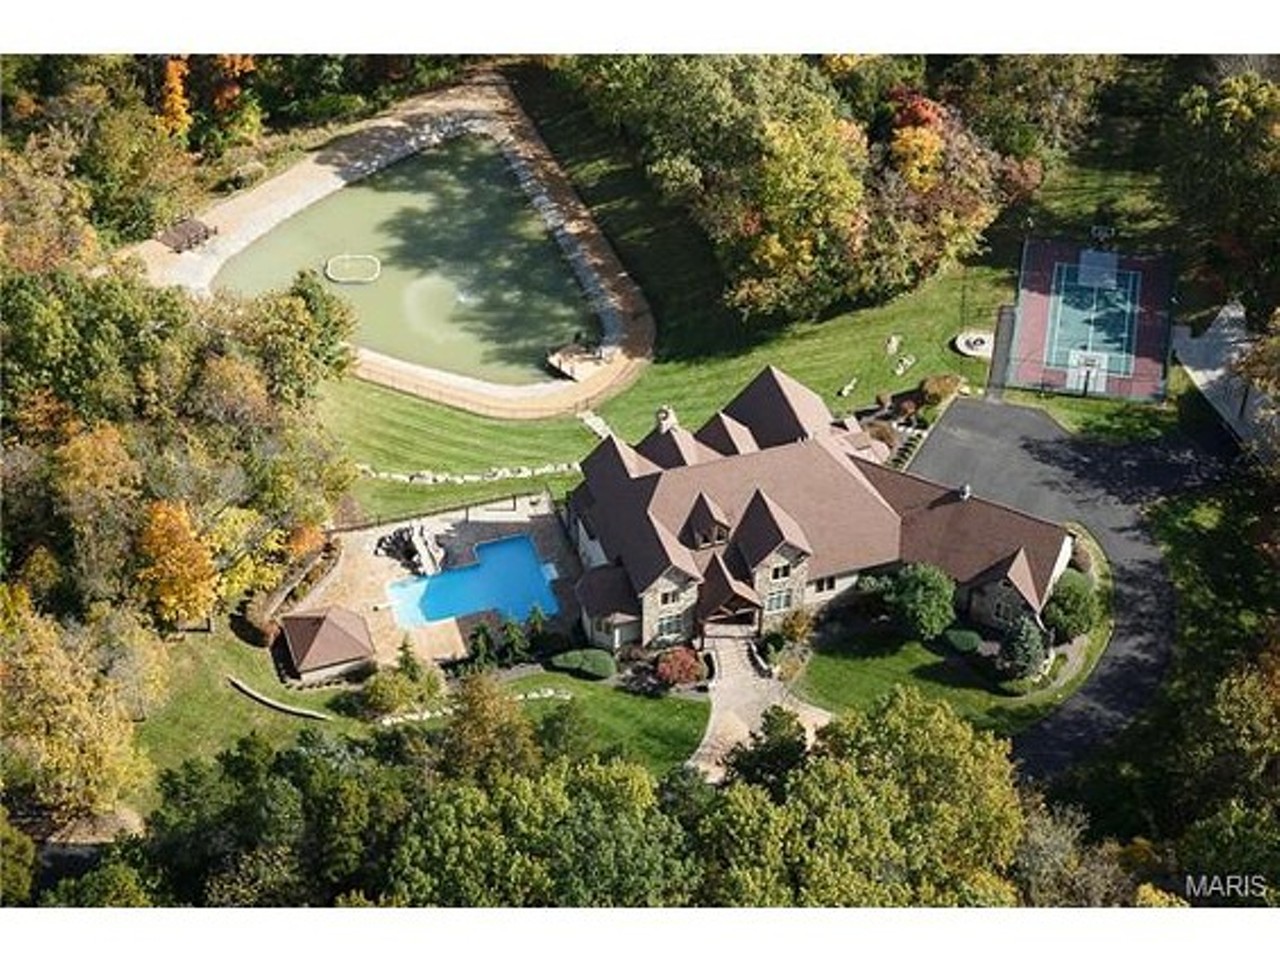 Published January 23, 2015 
Mike Matheny's dream house? You guys are totally nosy!Photo by Coldwell Banker Gundaker.